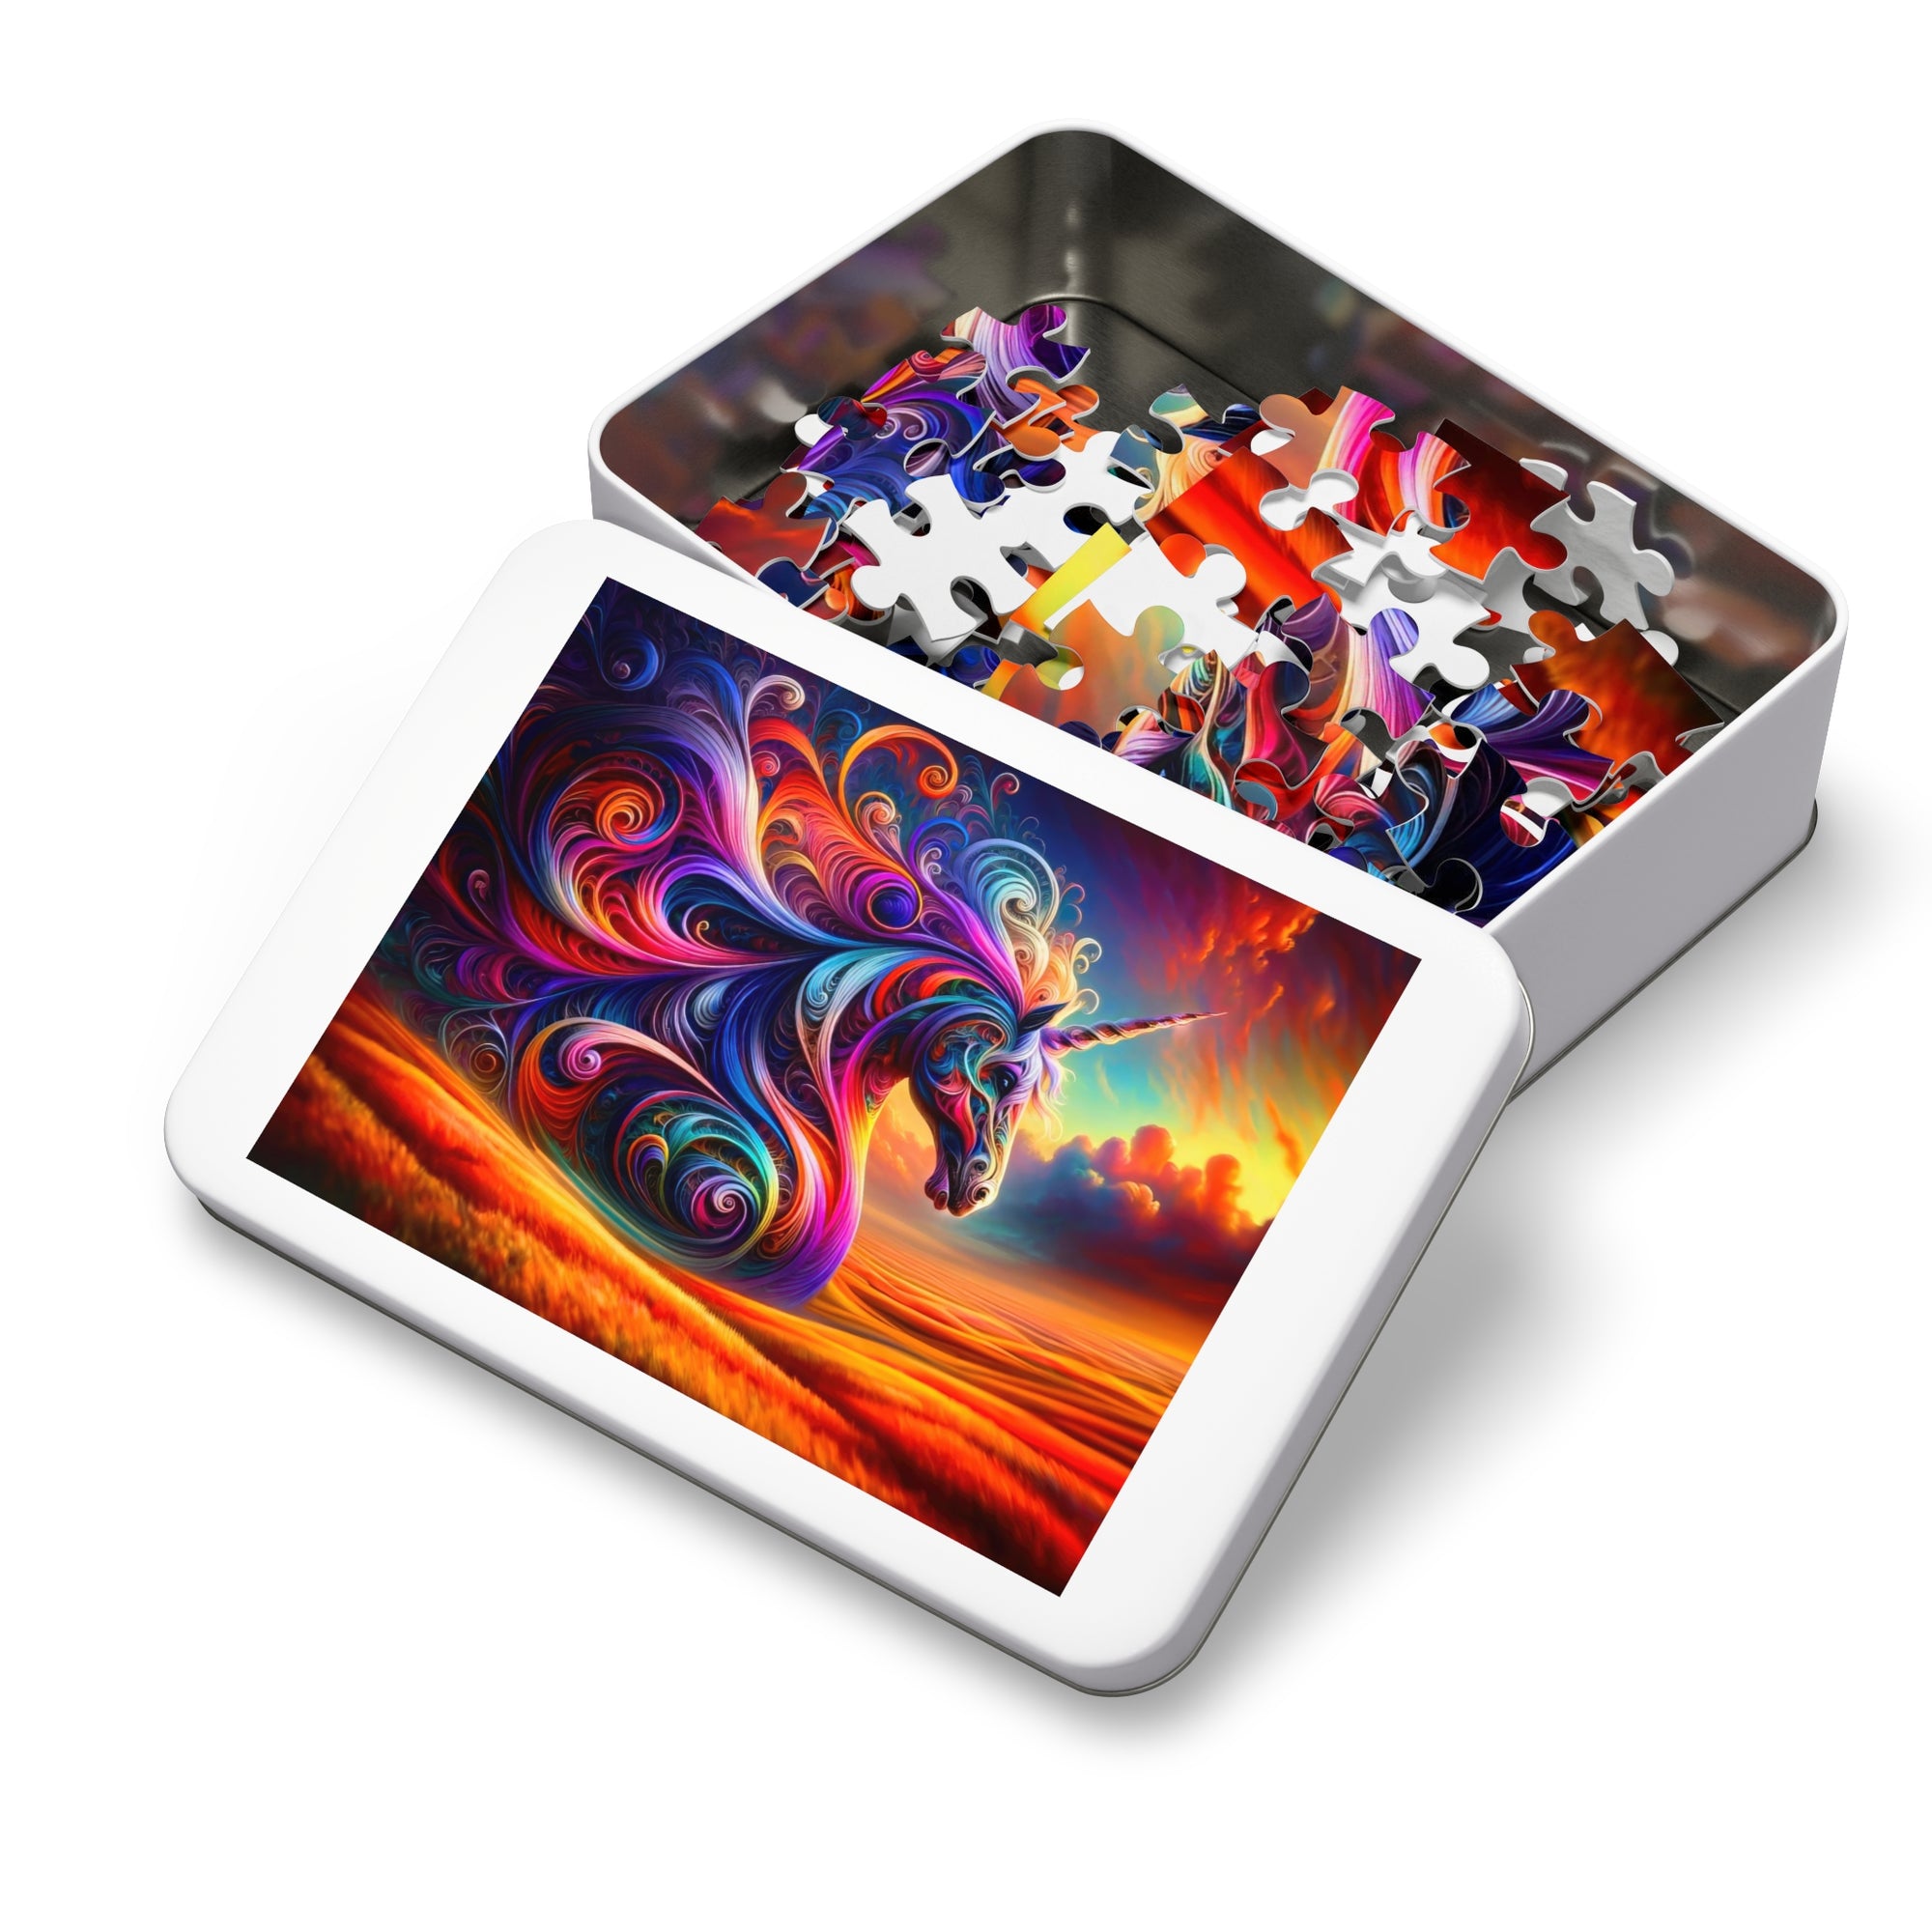 The Chromatic Chronicles of a Celestial Steed Jigsaw Puzzle